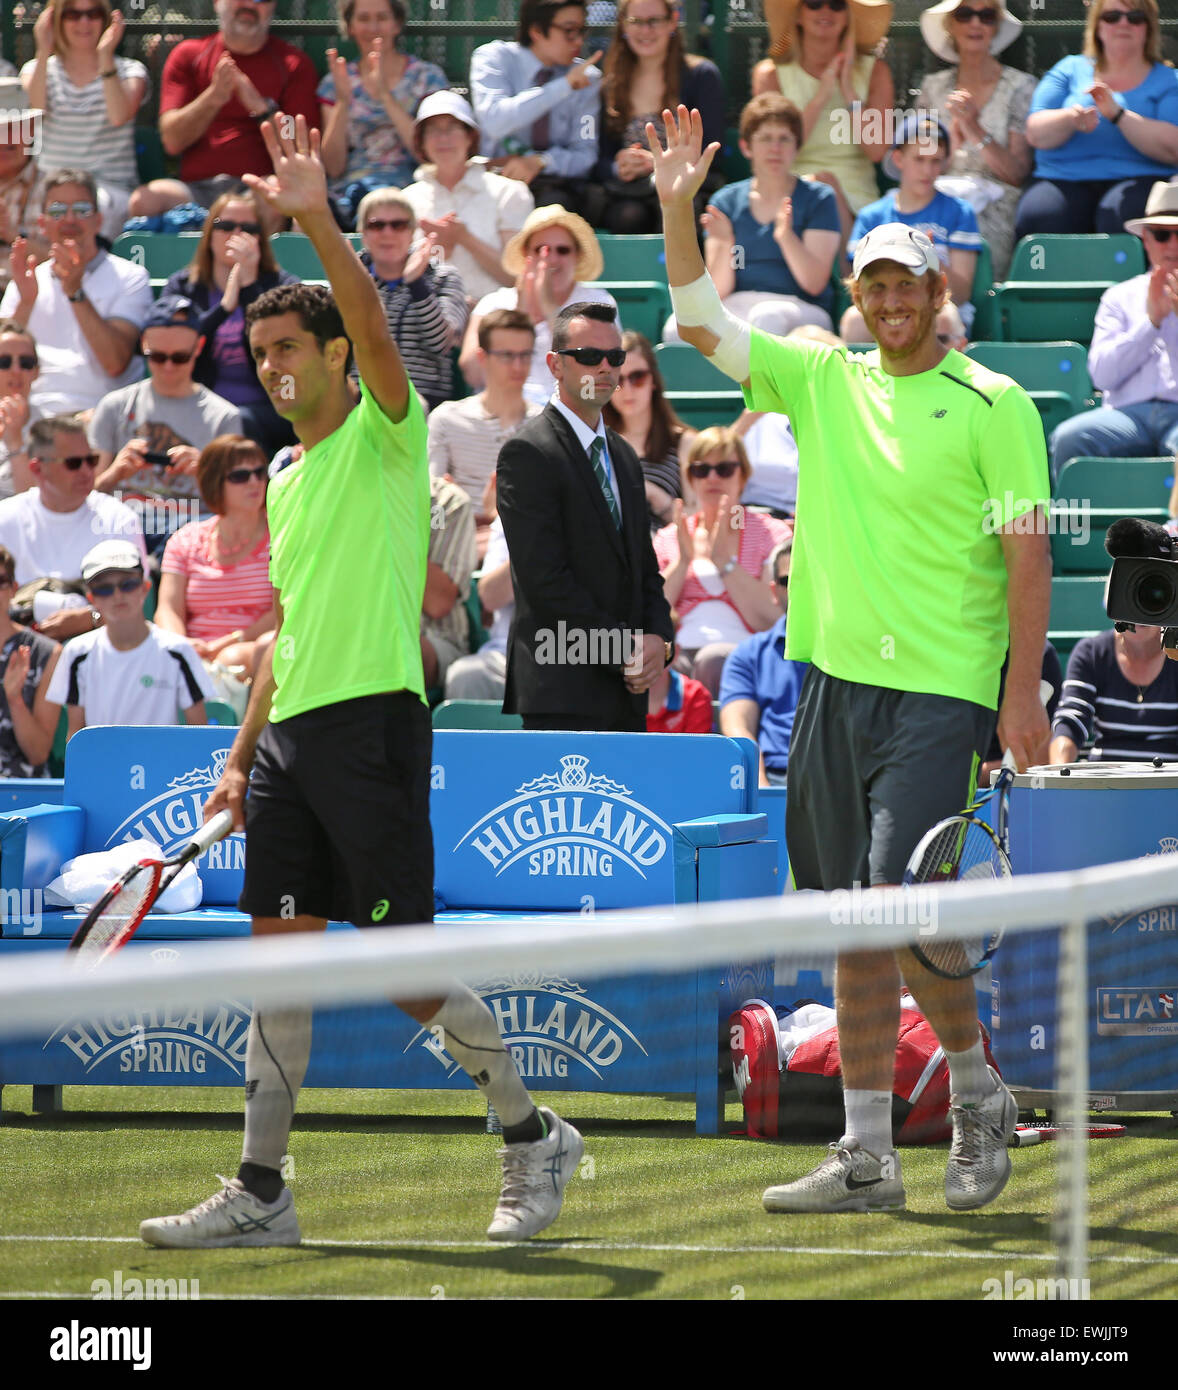 Nottingham, UK. 27th June, 2015. Aegon Nottingham Open Tennis Tournament. Chris Guccione and Andre Sa acknowledge the crowd after their victory in the men's double final on centre court Credit:  Action Plus Sports/Alamy Live News Stock Photo